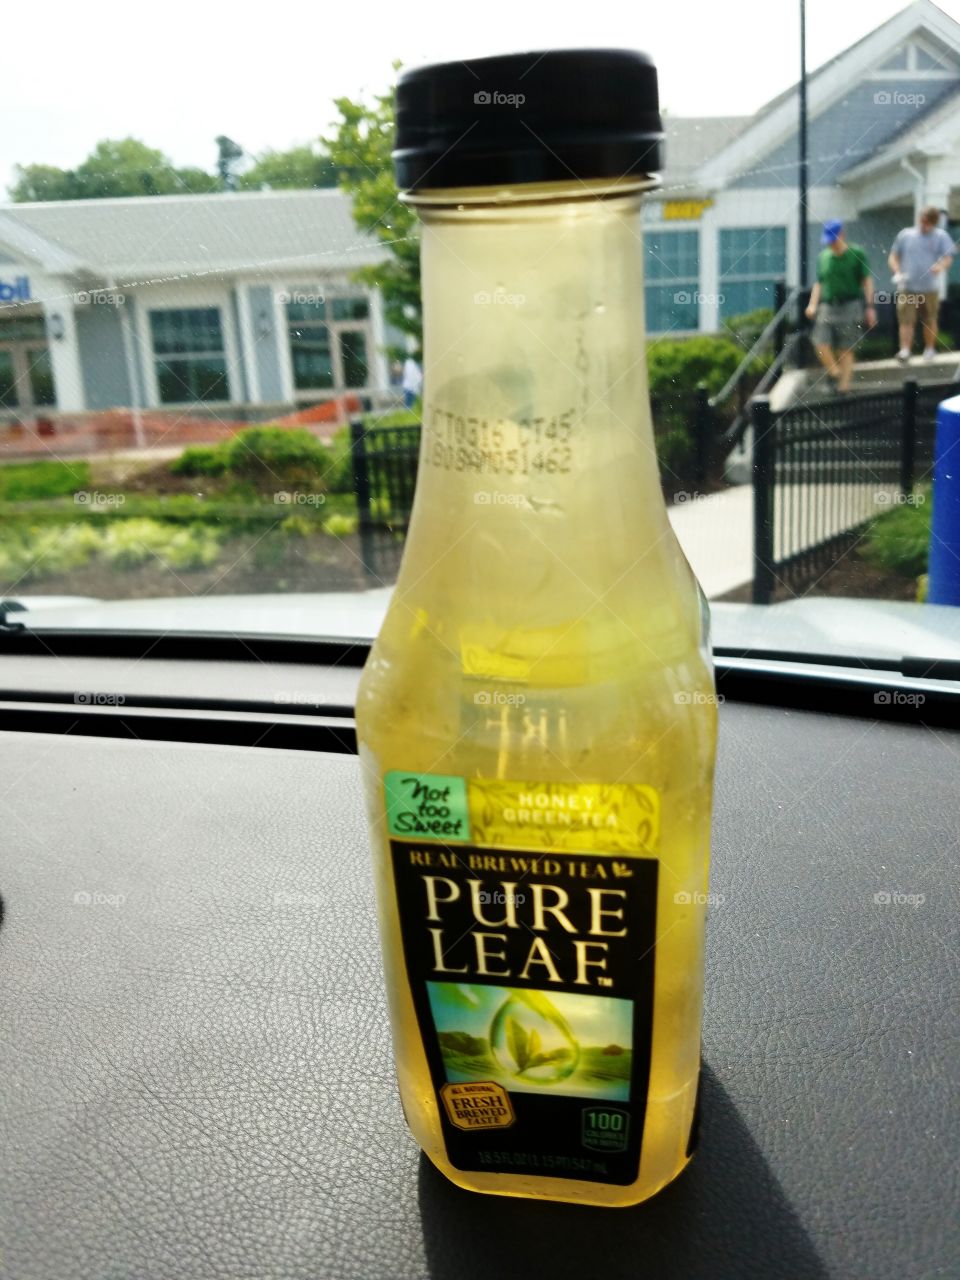 Quenching thirst with pure leaf tea.